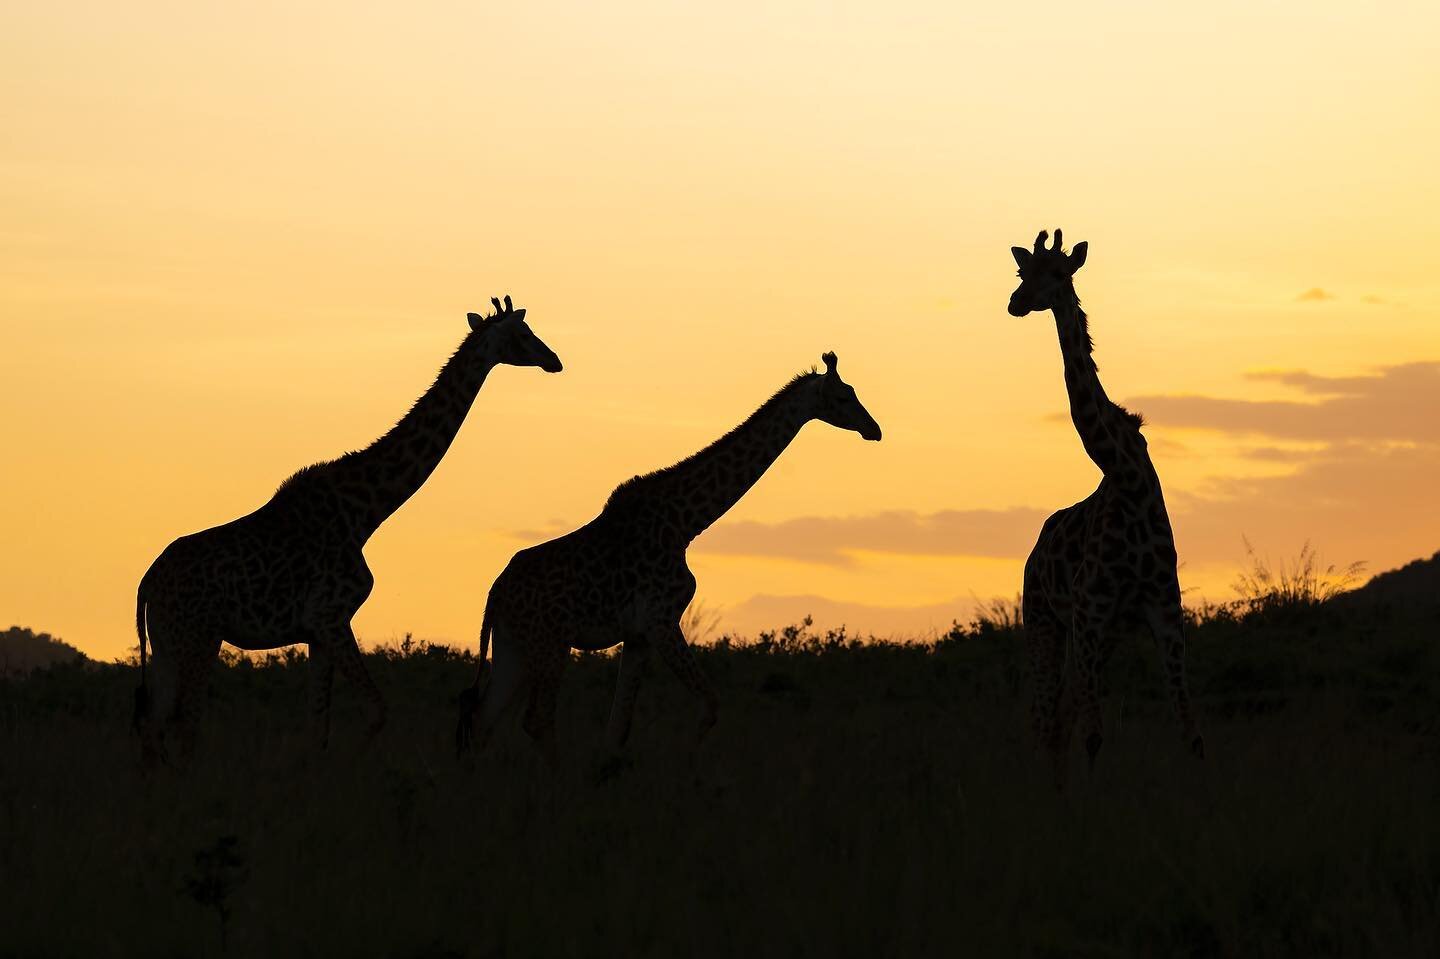 Switching gears to East Africa for a moment. @stevemattheis and I are leading another two safaris in East Africa in 2024. The Kenya safari is sold out. We still have room on the Tanzania safari. Grab your spot now! Join us for giraffes, leopards, lio